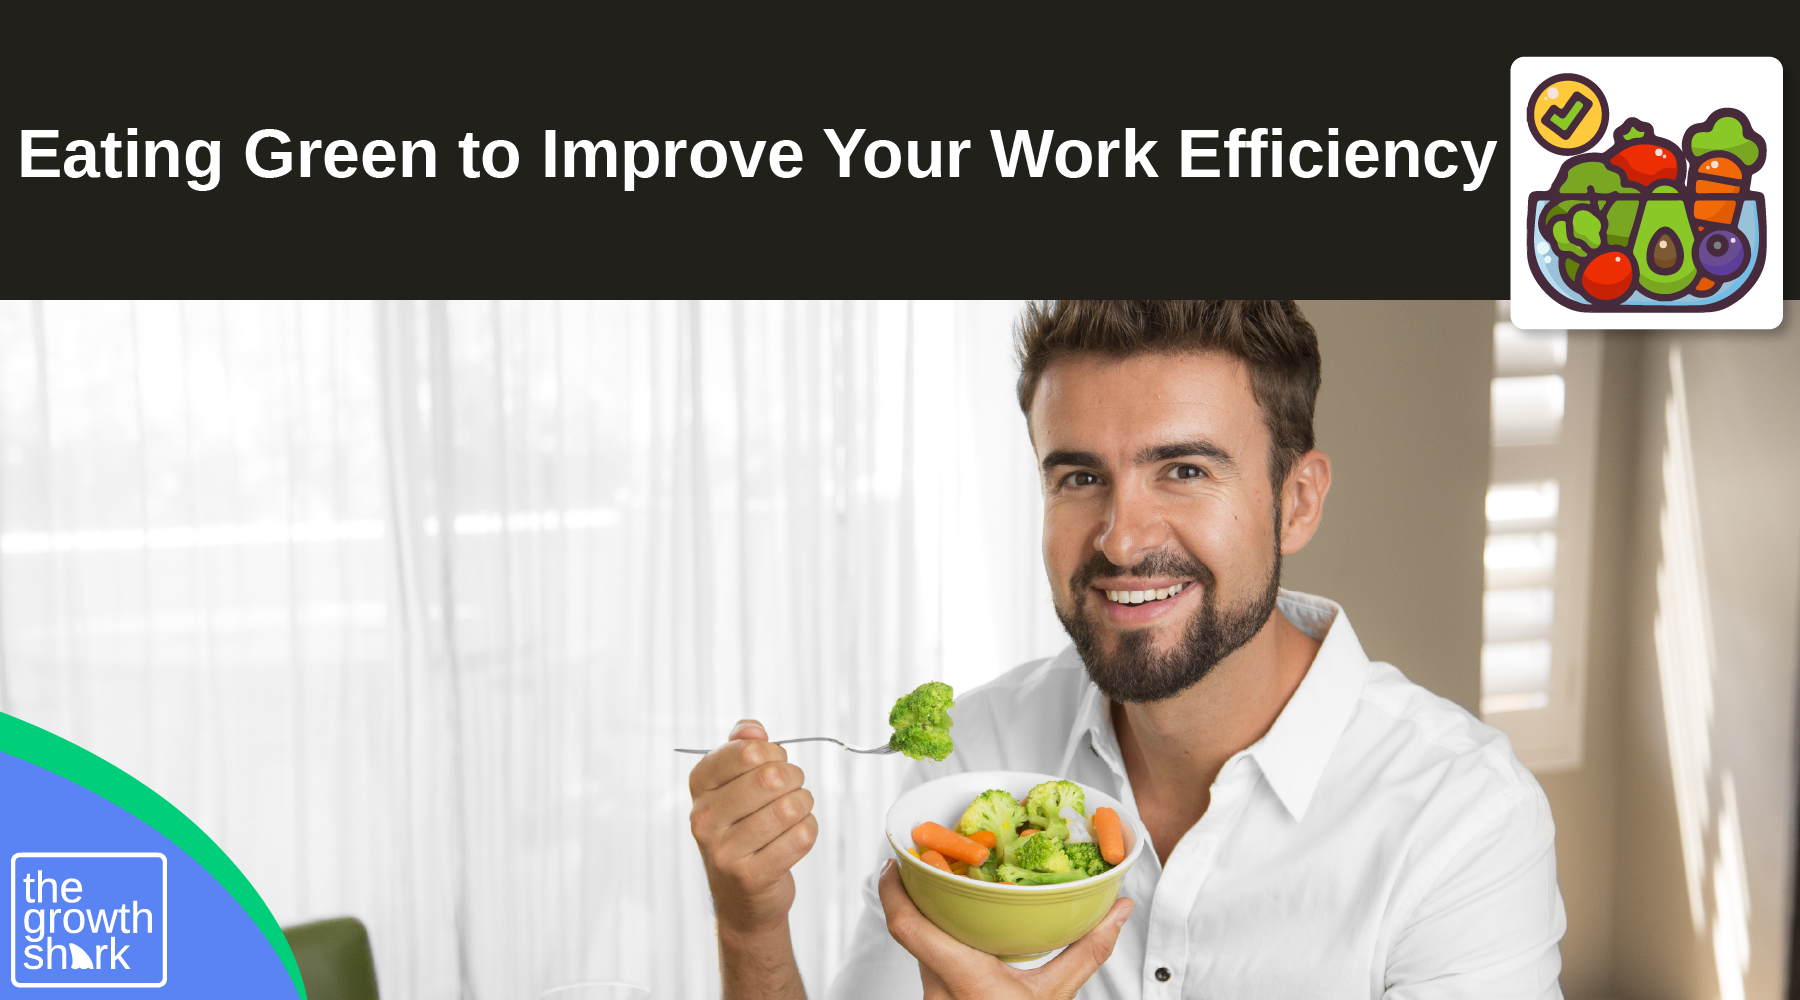 How Eating Green Can Help You Improve Your Work Efficiency